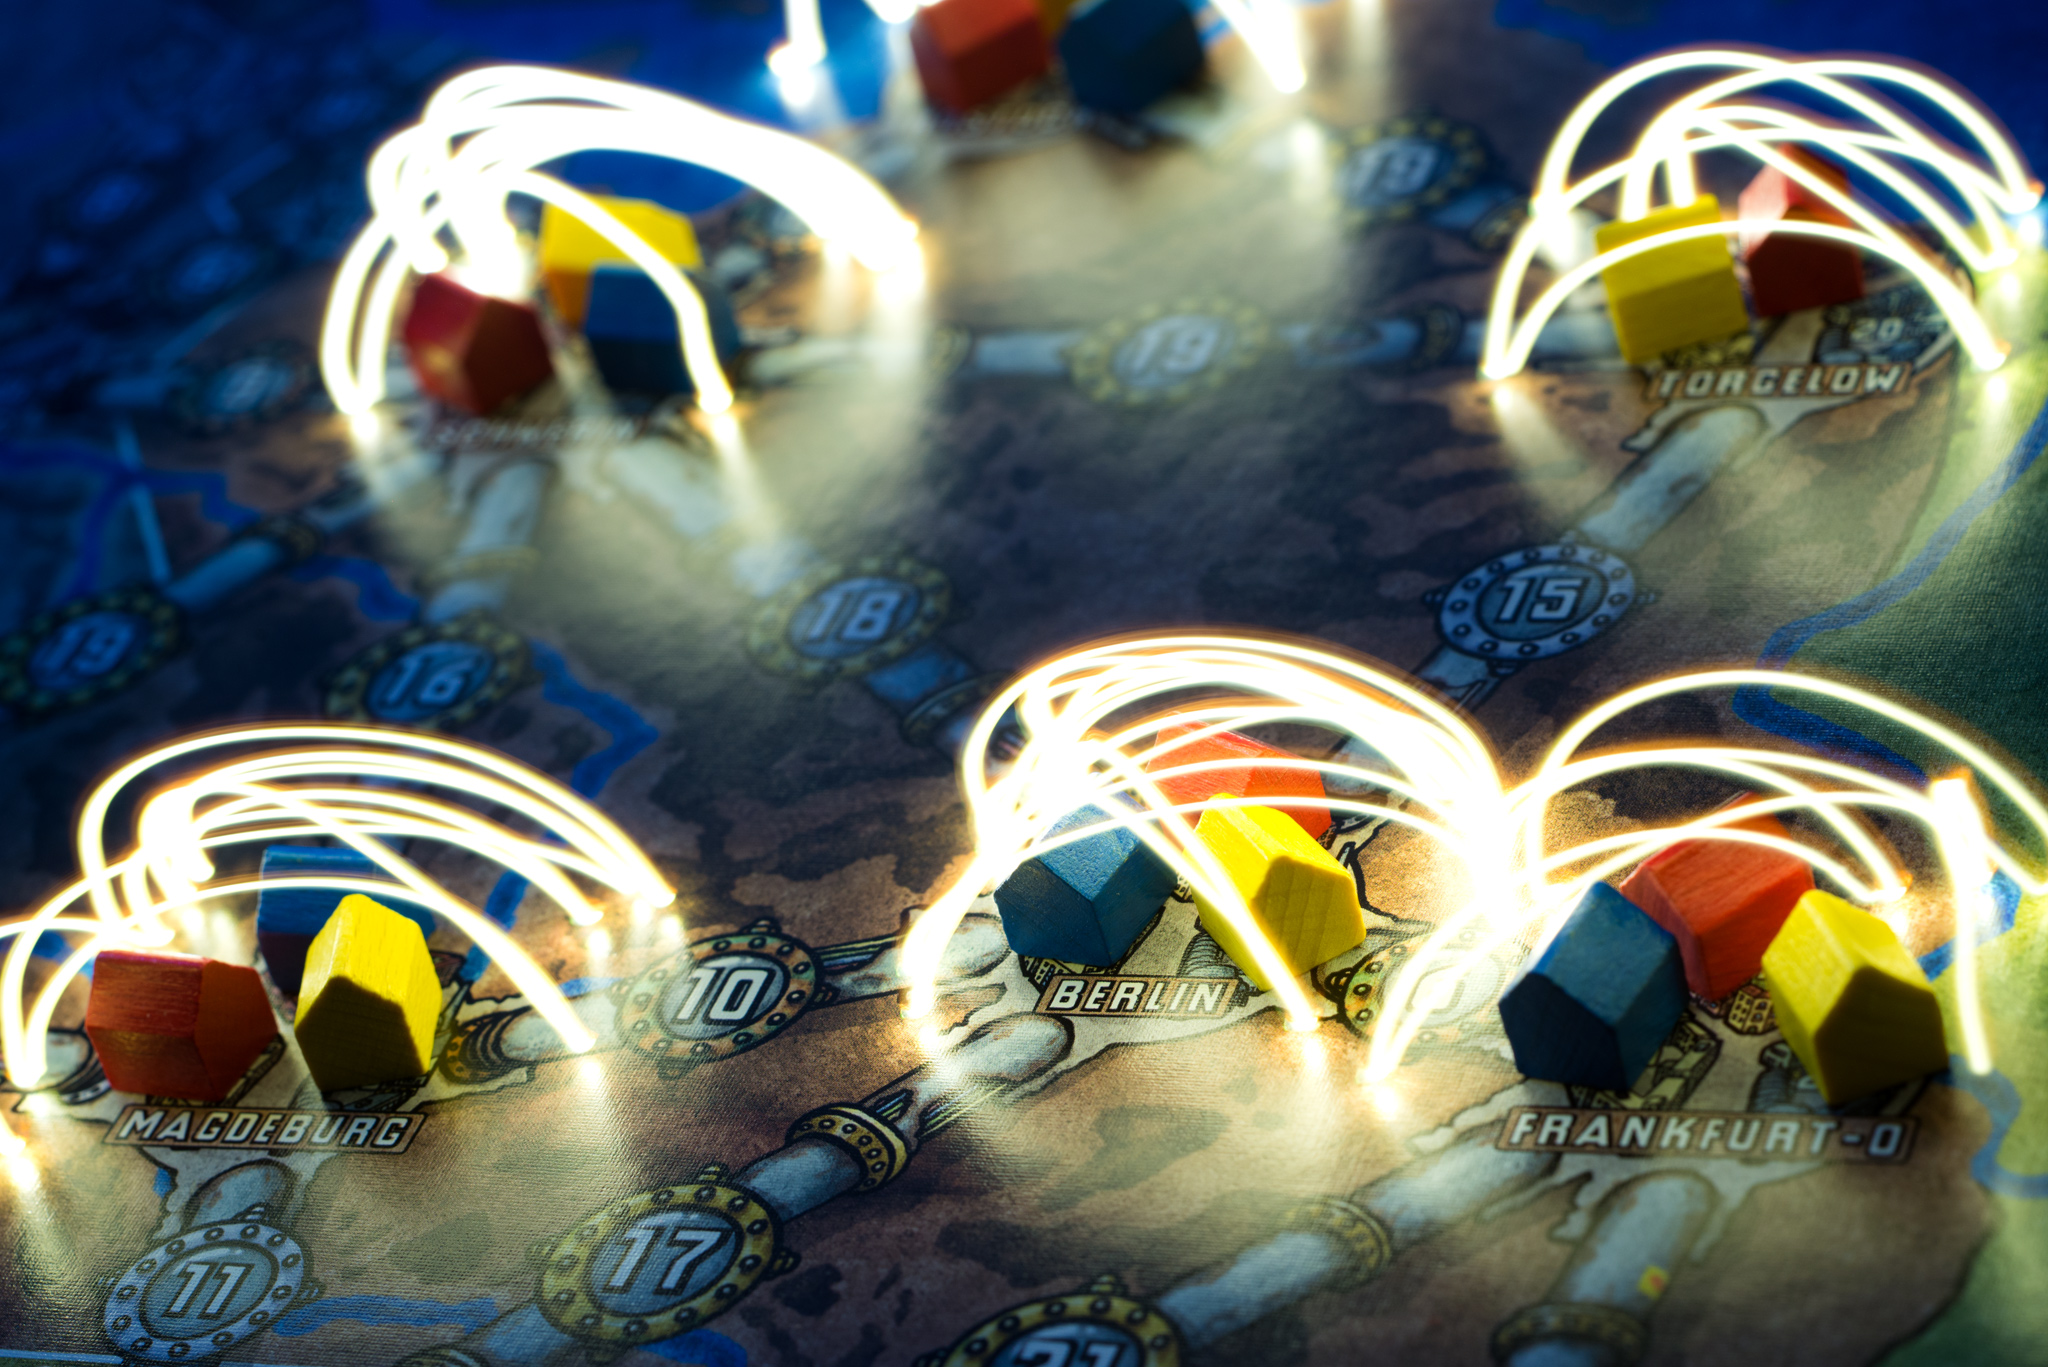 Zap! Electrifying image of Power Grid board game